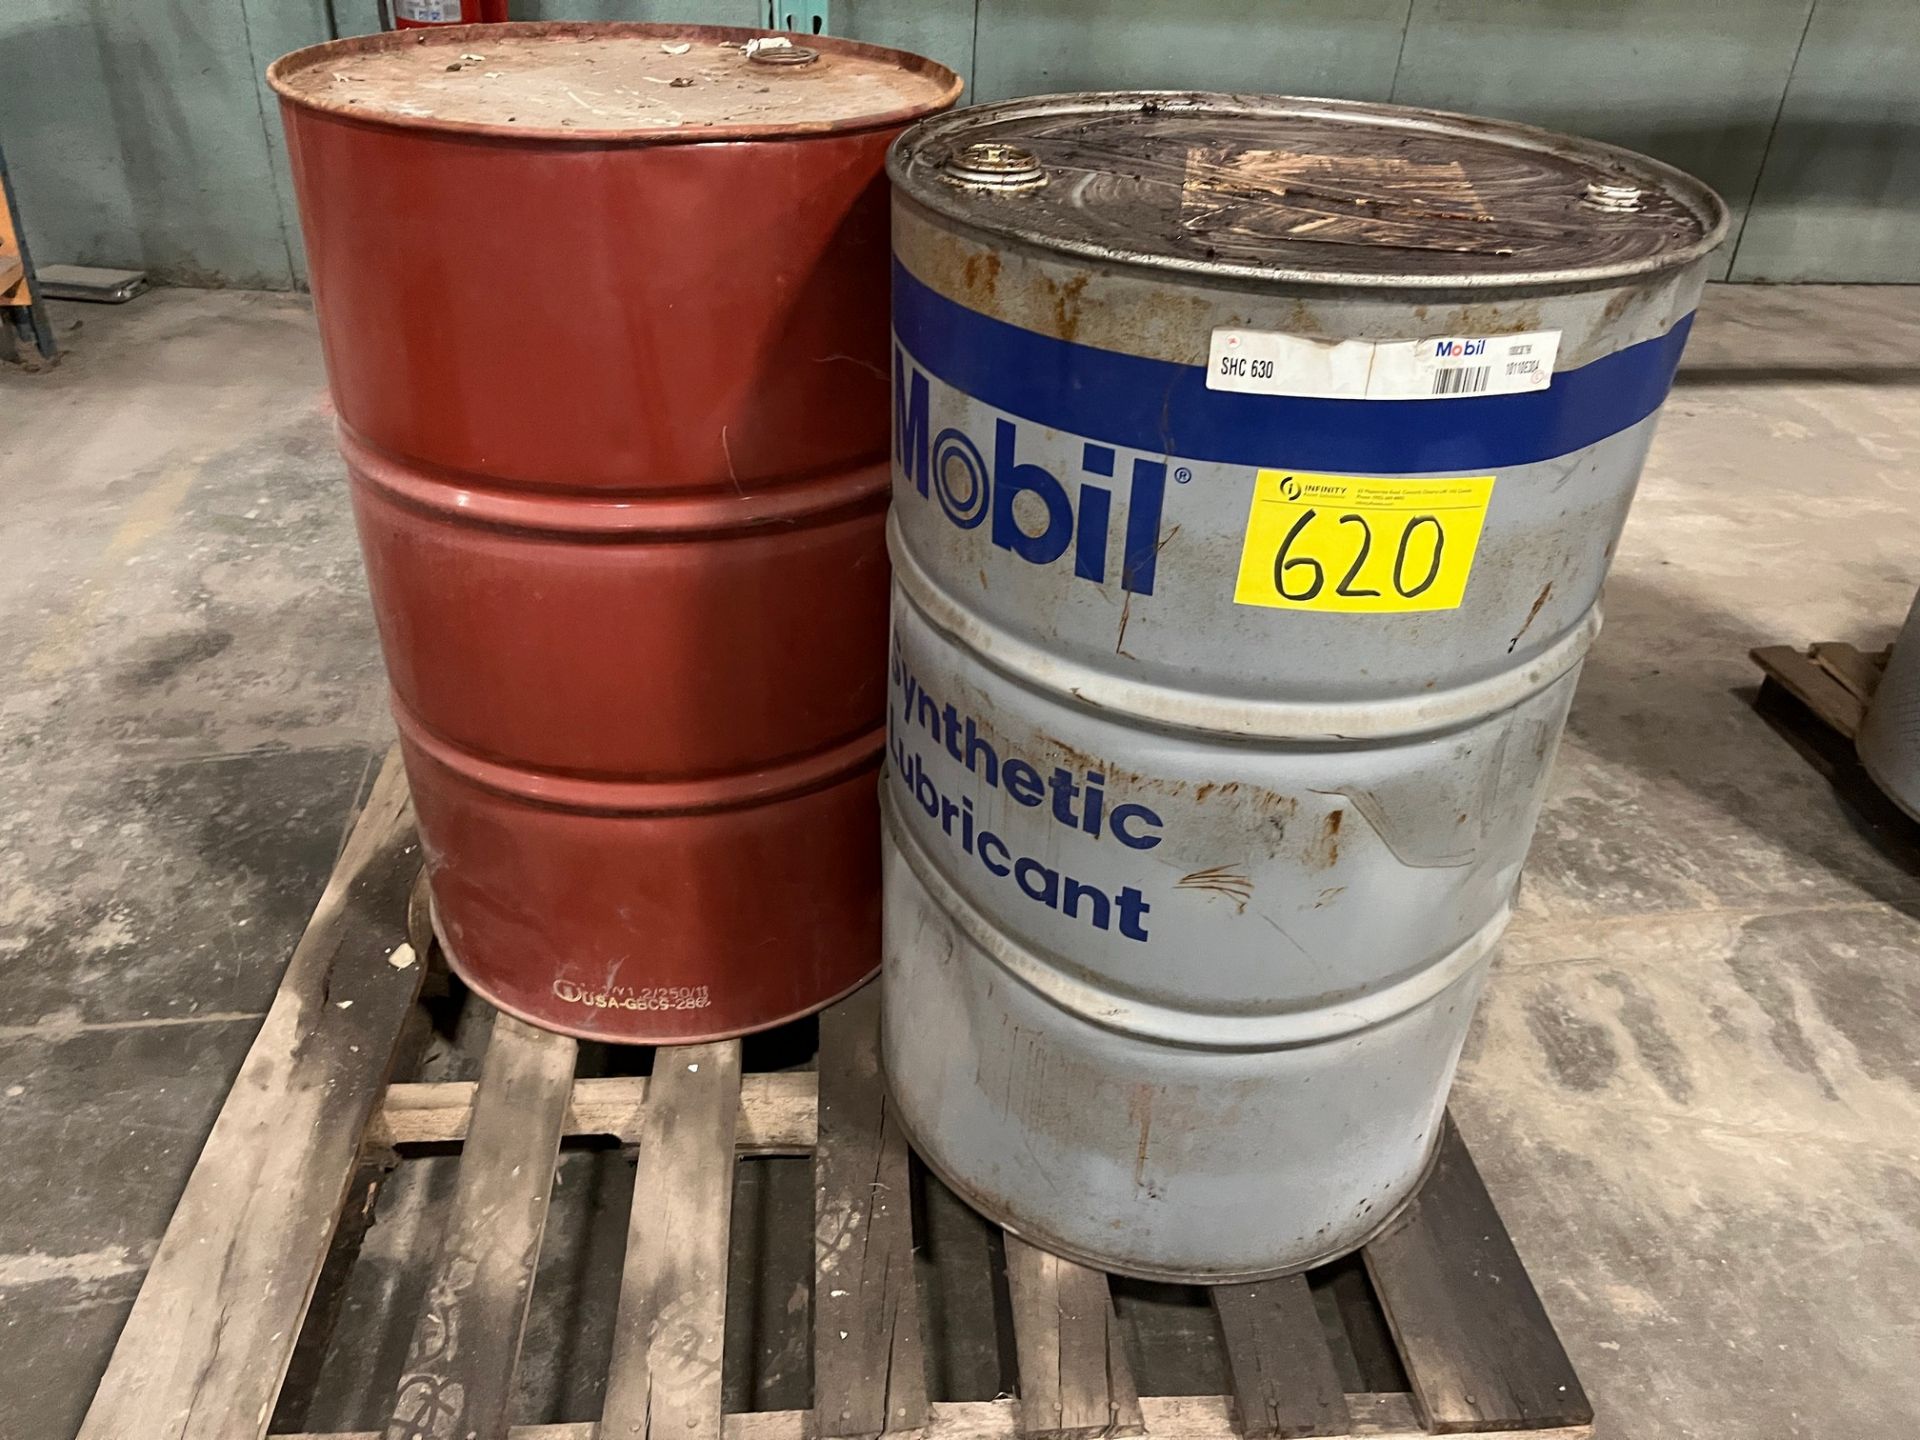 LOT OF (2) BARRELS OF MOBIL SHC630 SYNTHETIC LUBRICANT (PM MAIN WAREHOUSE)